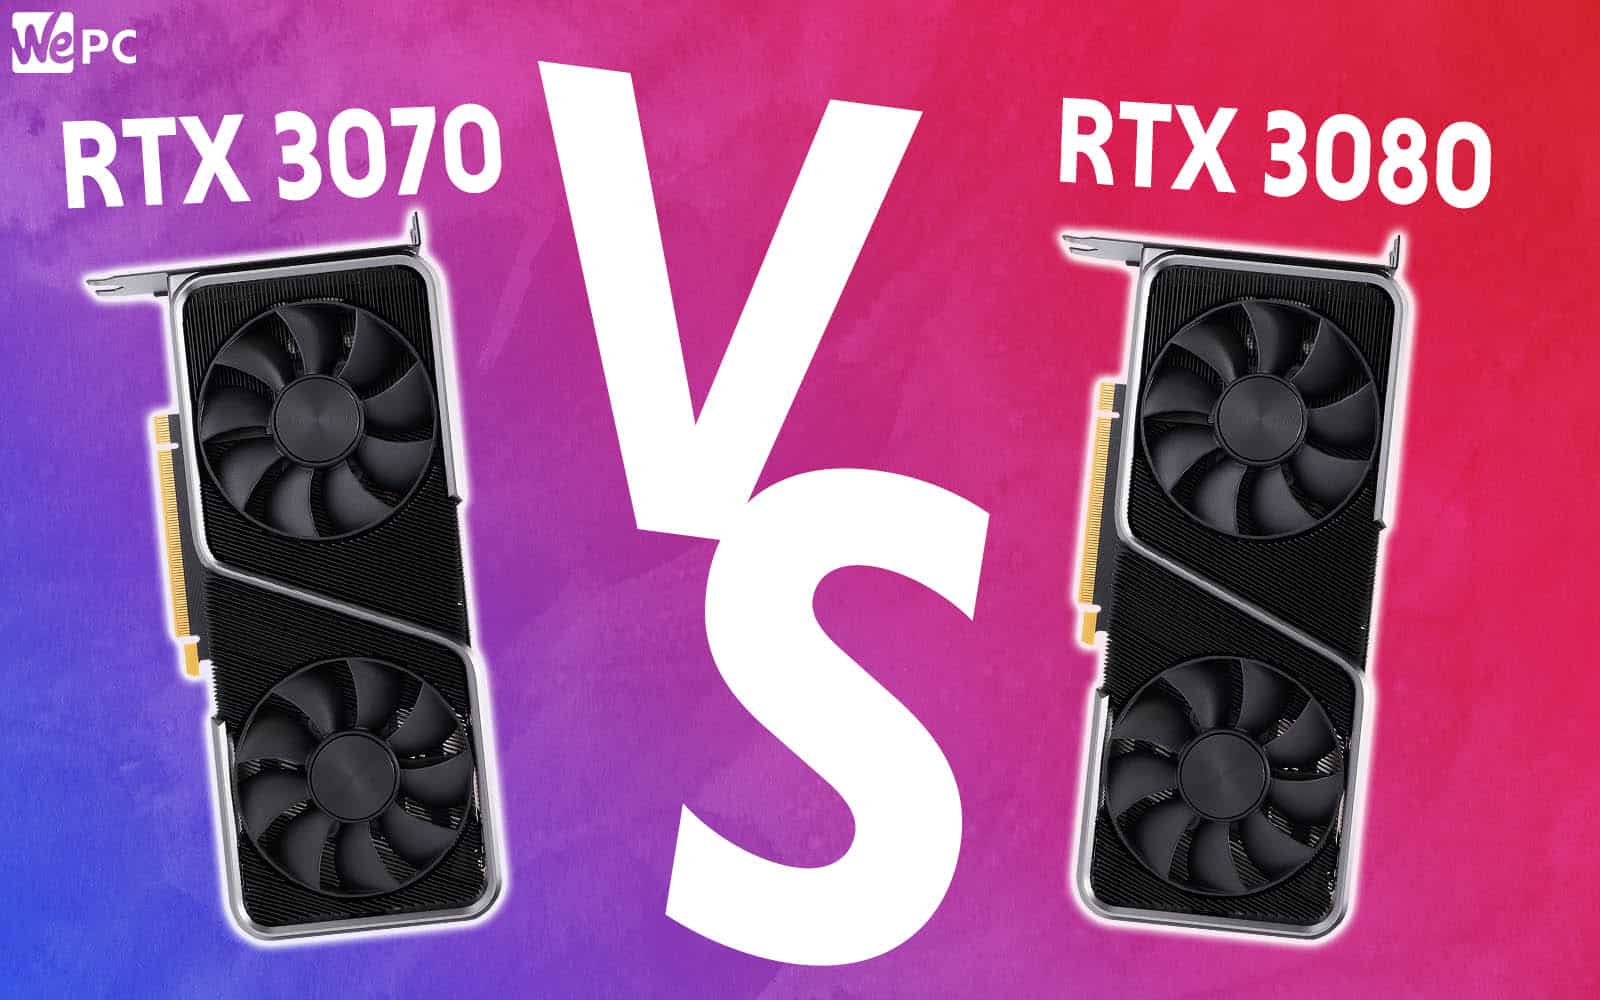 Nvidia RTX 3070 vs 3080 – which mid-range GPU is for you